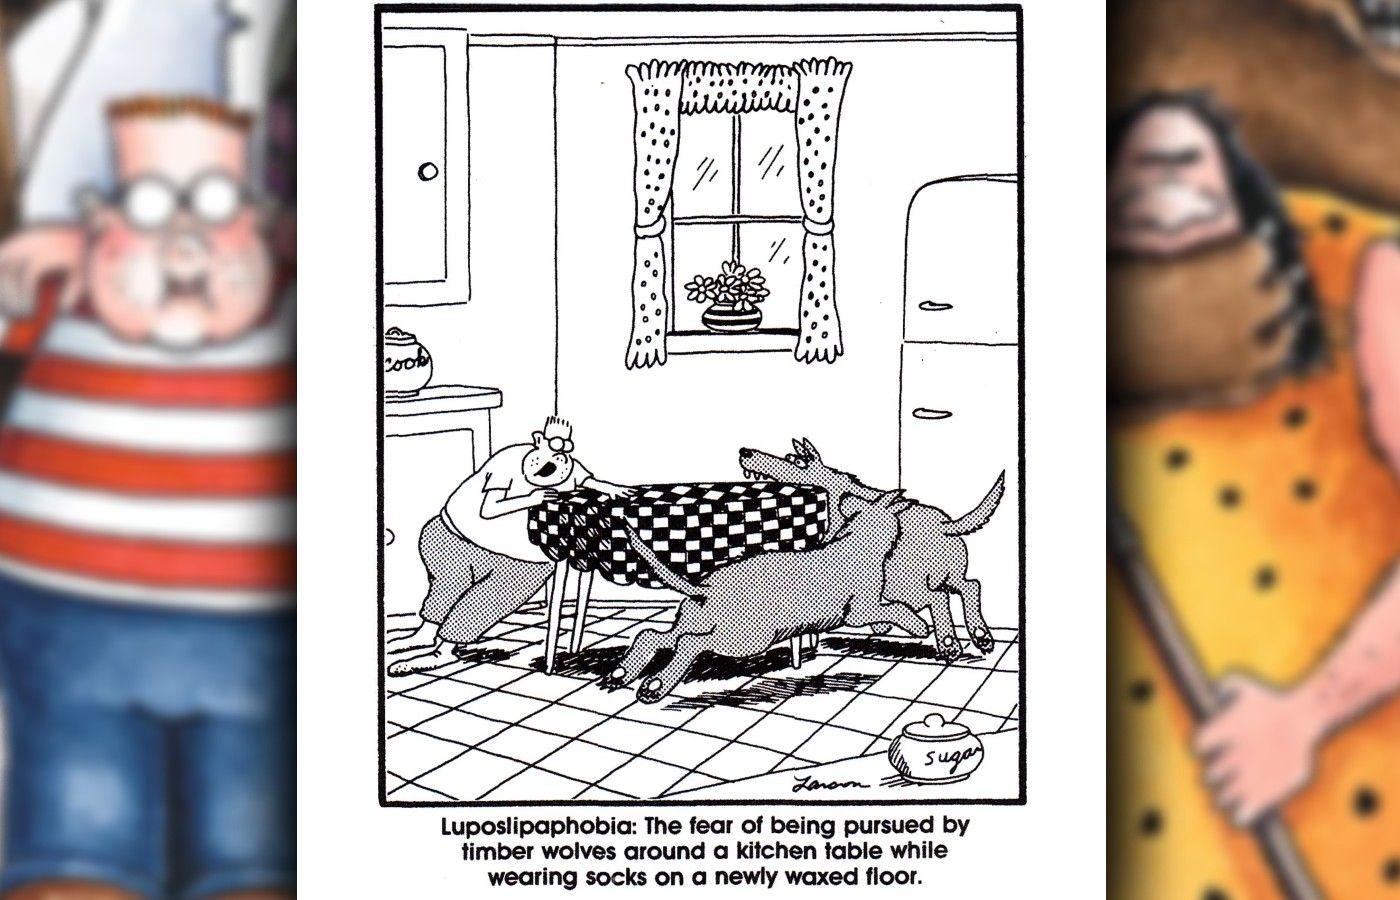 famous far side comic about being chased by wolves